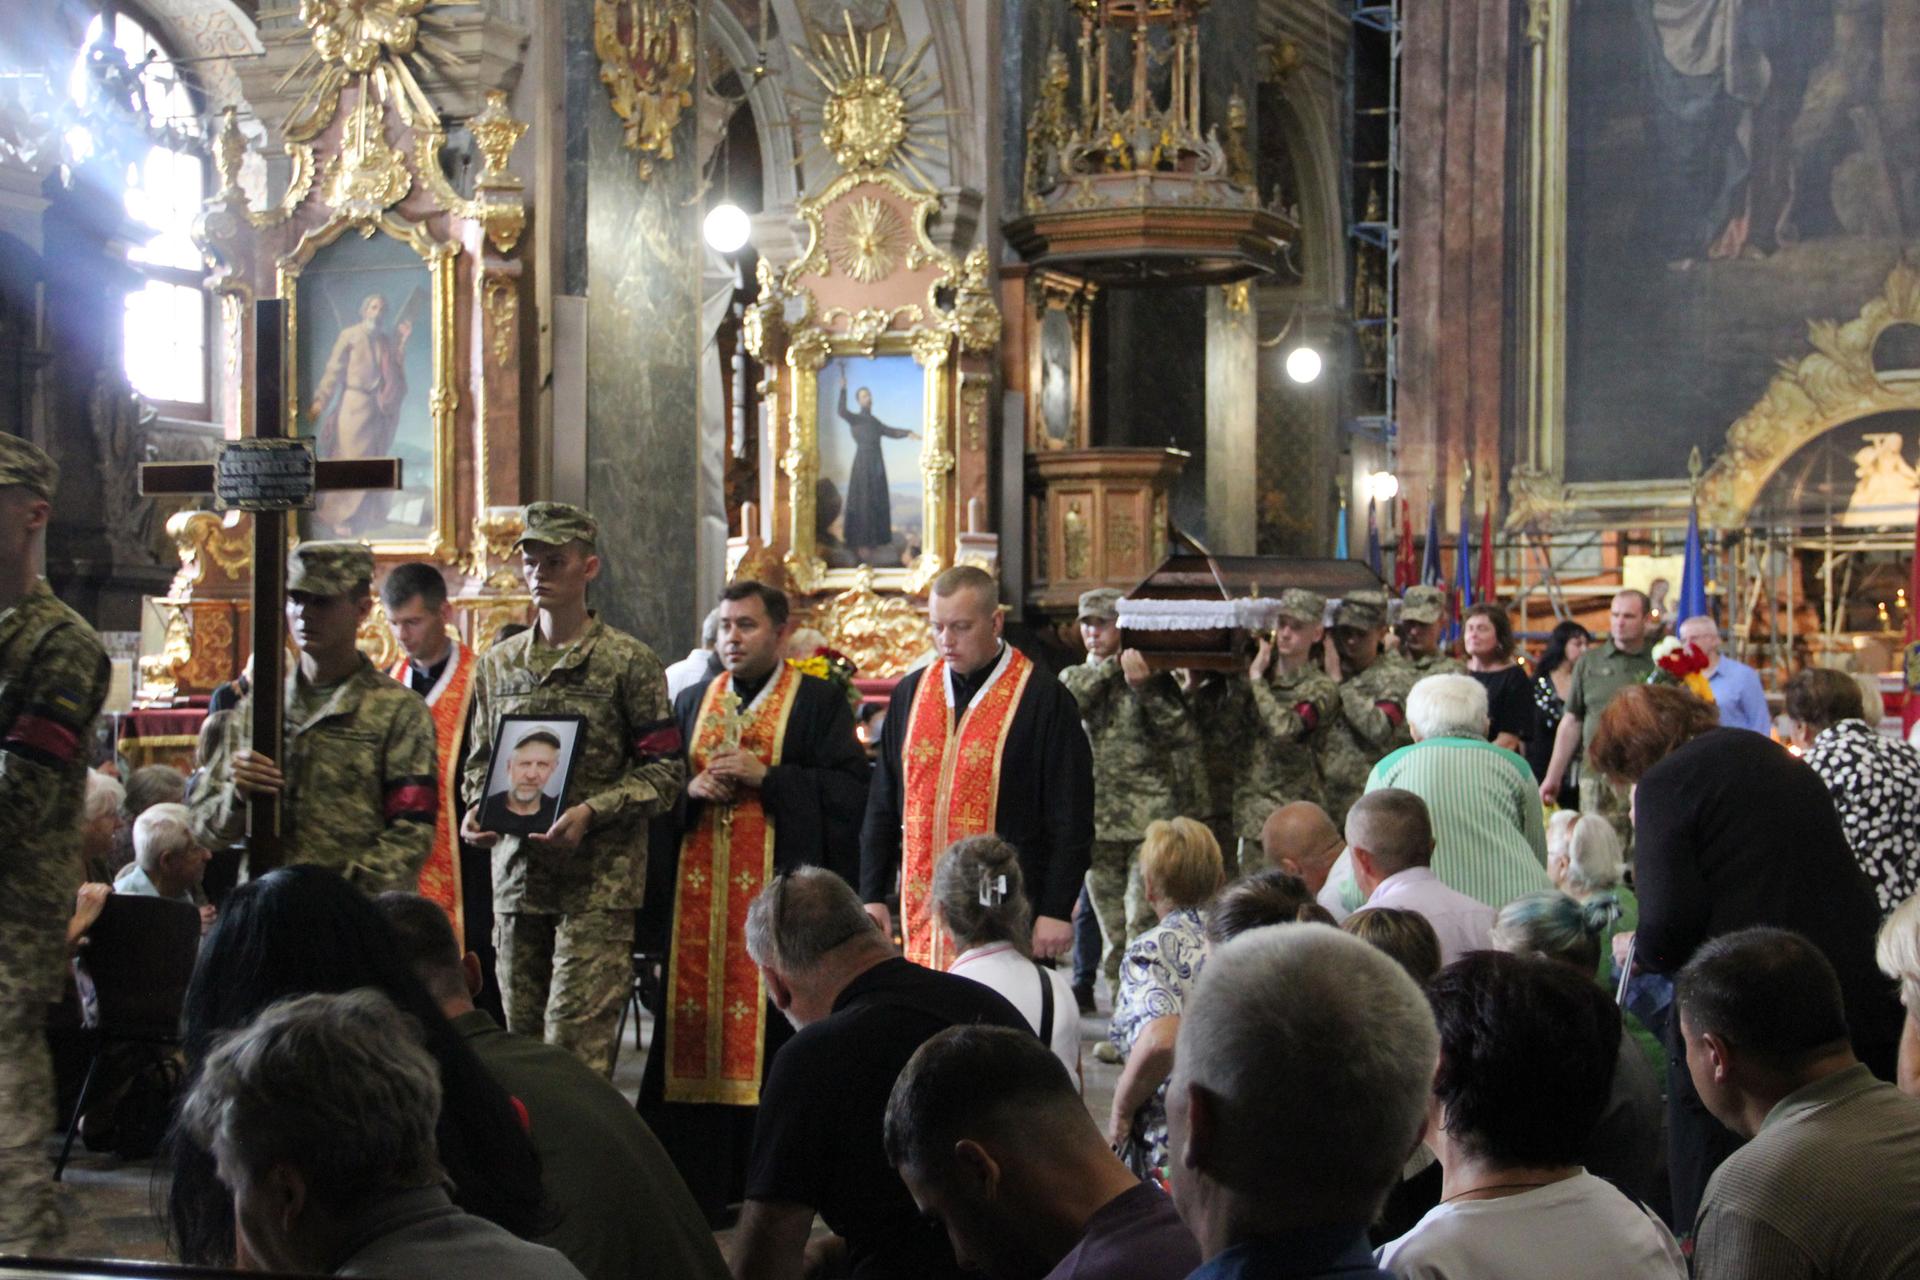 At Saints Peter and Paul Garrison Church, the morning service is followed by a funeral for fallen Ukrainian soldier, Lviv, Ukraine.